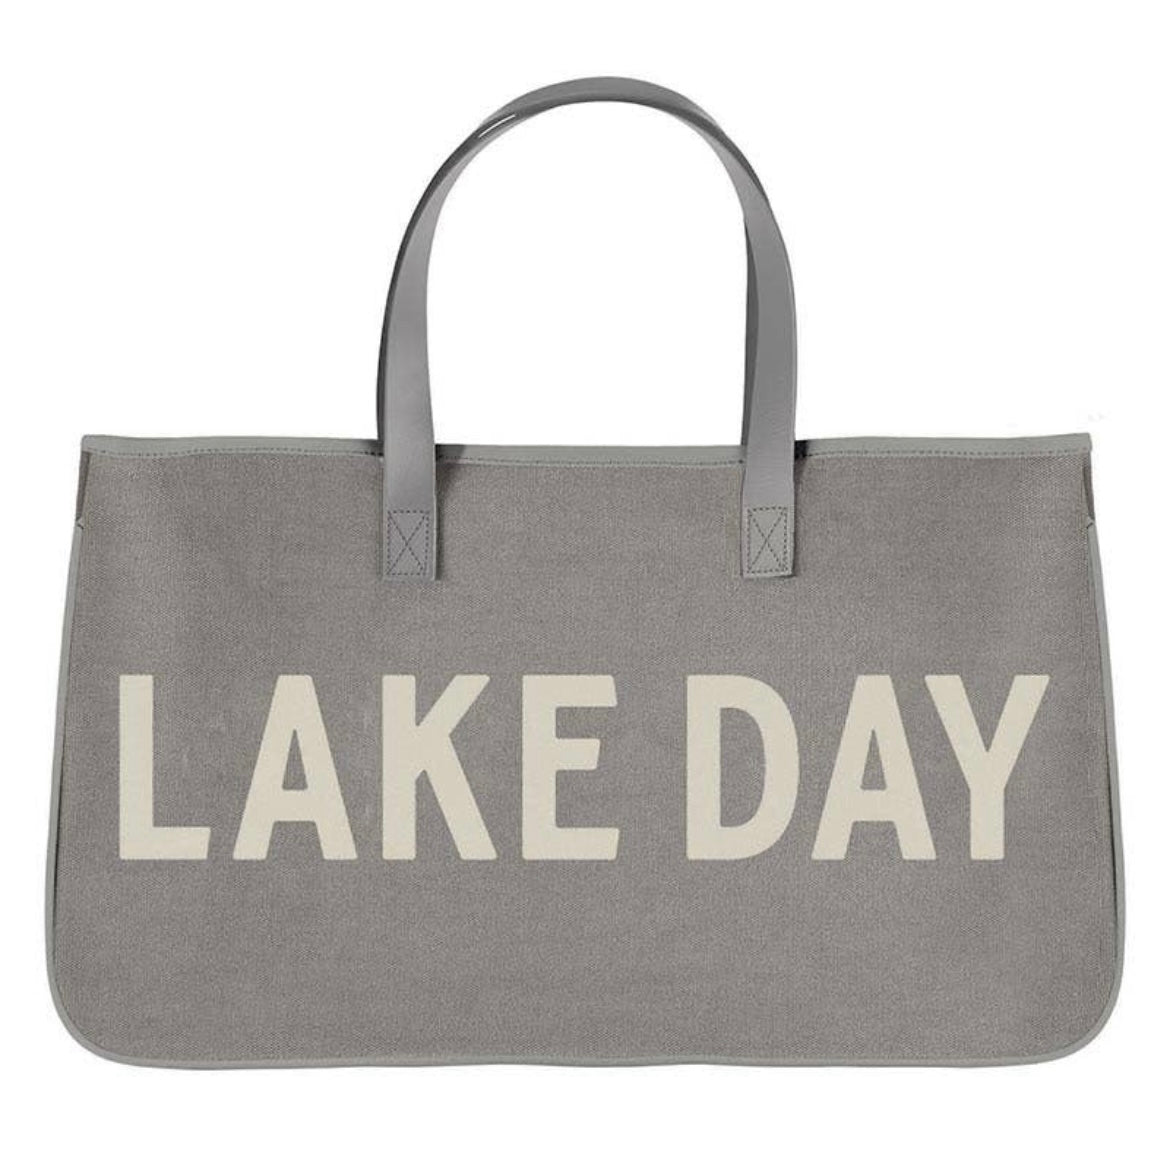 Lake Day Canvas Tote